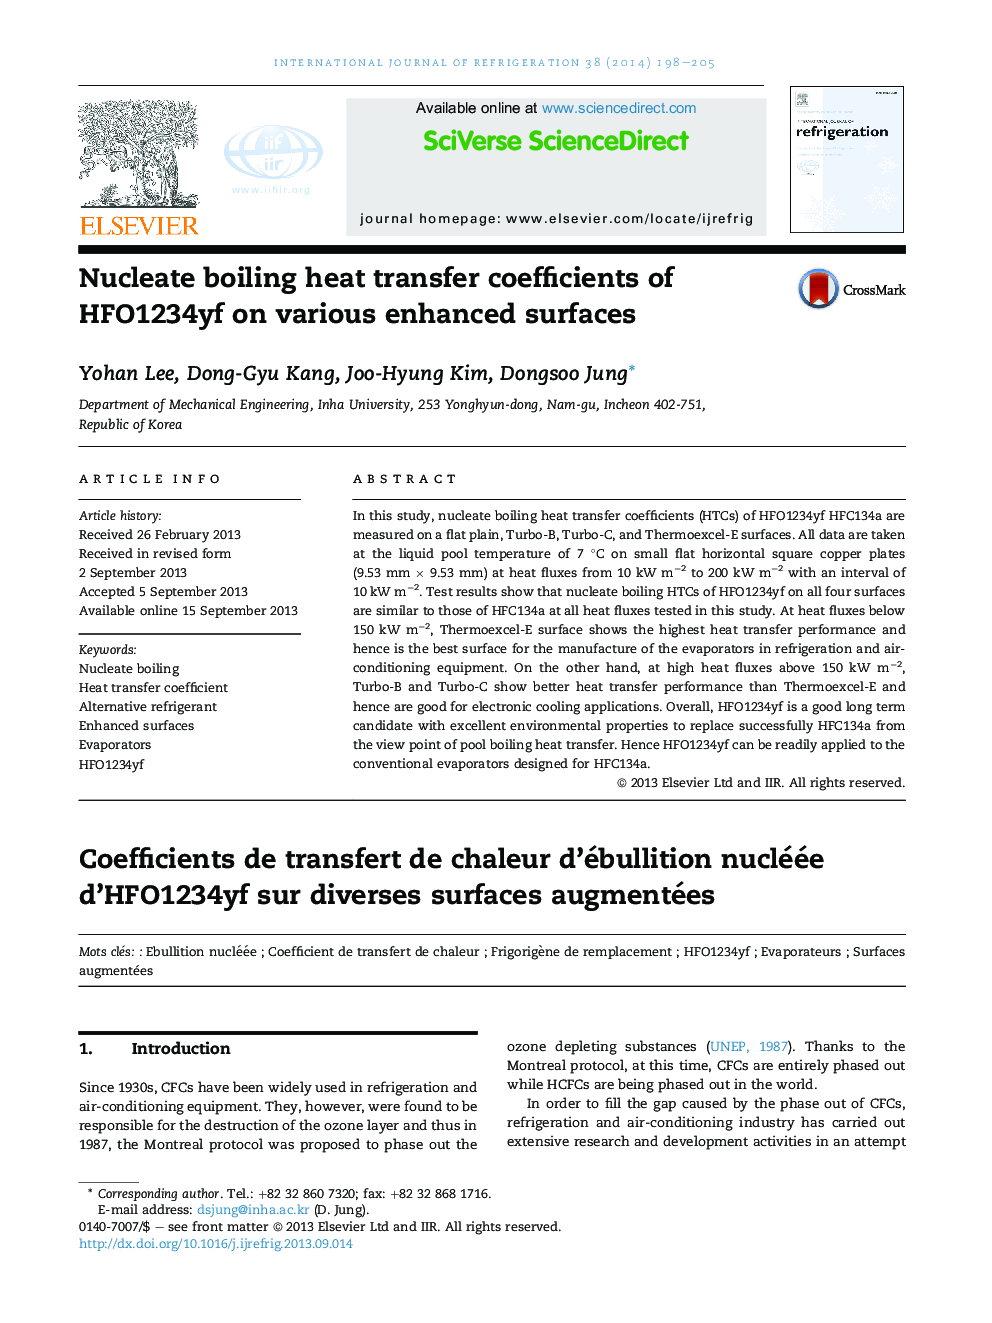 Nucleate boiling heat transfer coefficients of HFO1234yf on various enhanced surfaces